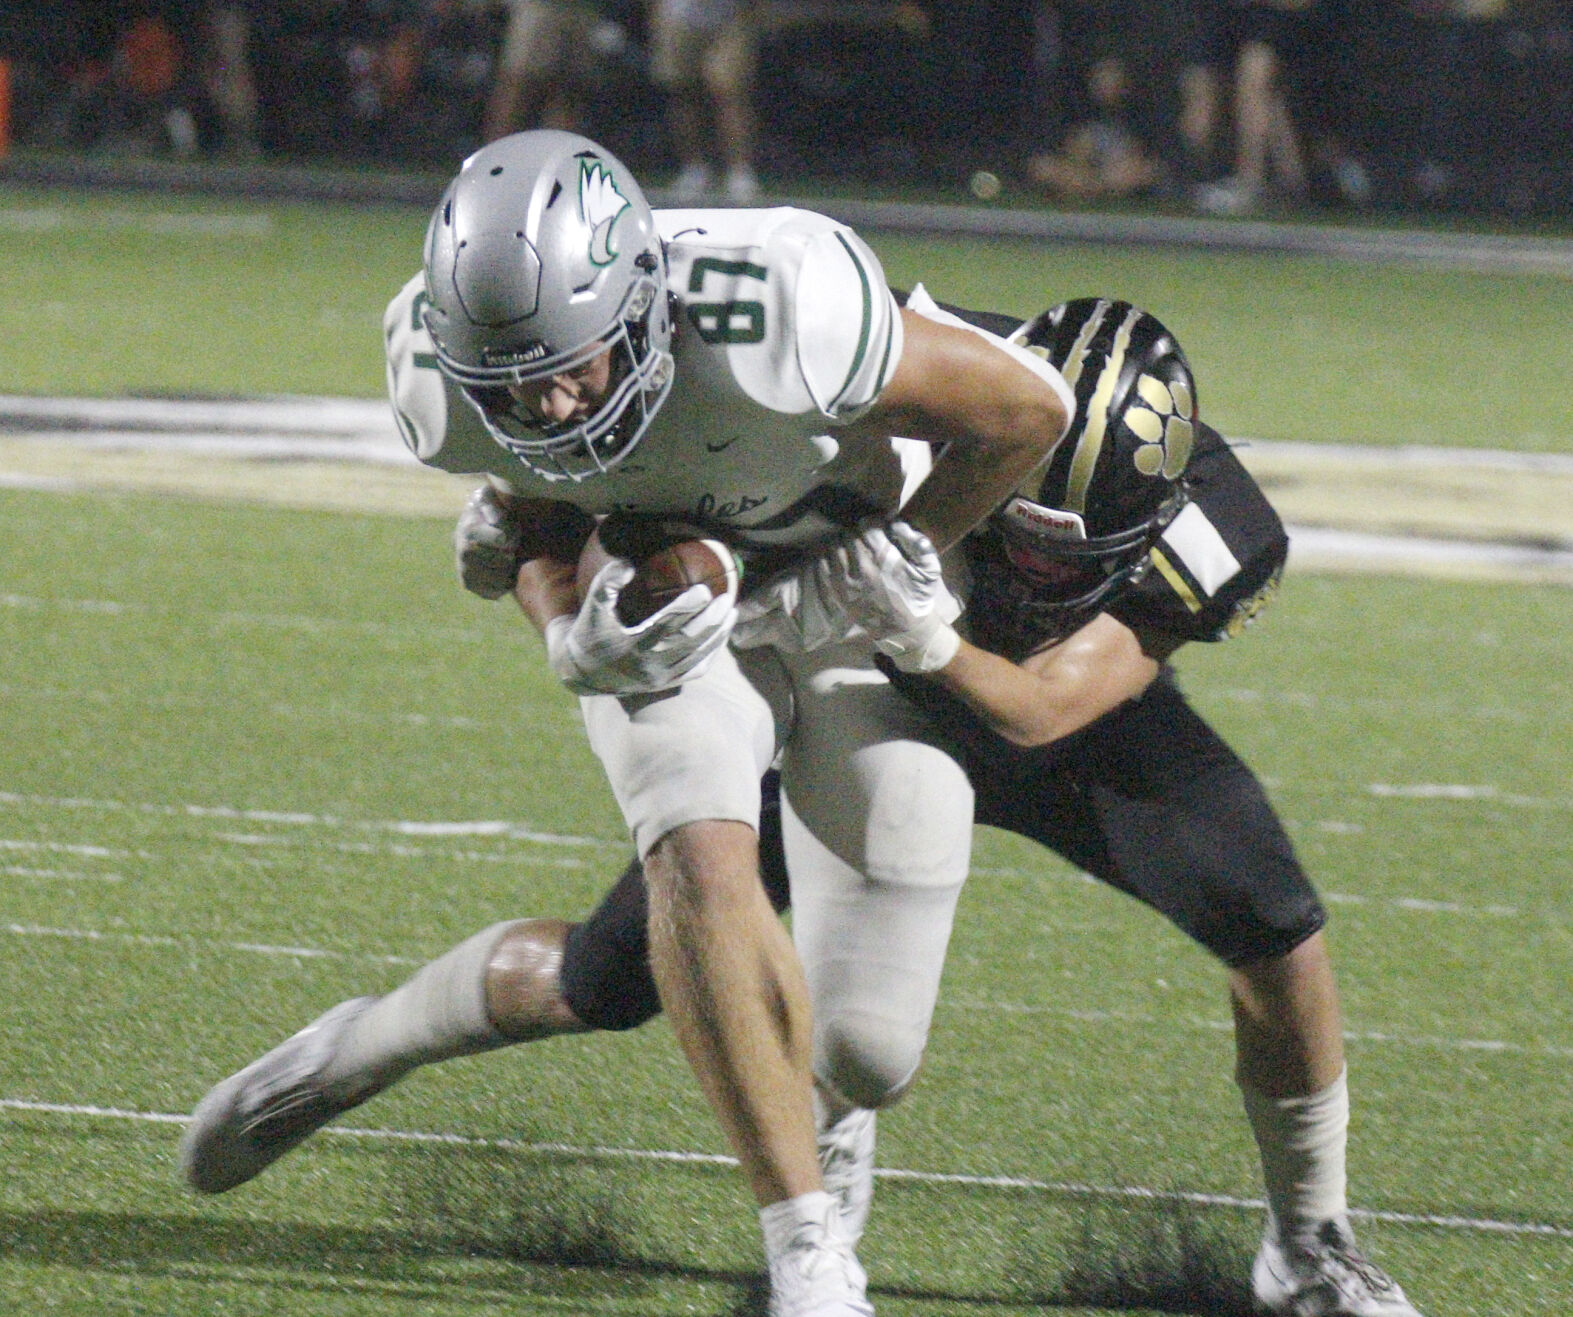 Zionsville Eagles’ Senior Tight End Mason Riggins: A Versatile Contributor in the Passing and Running Game